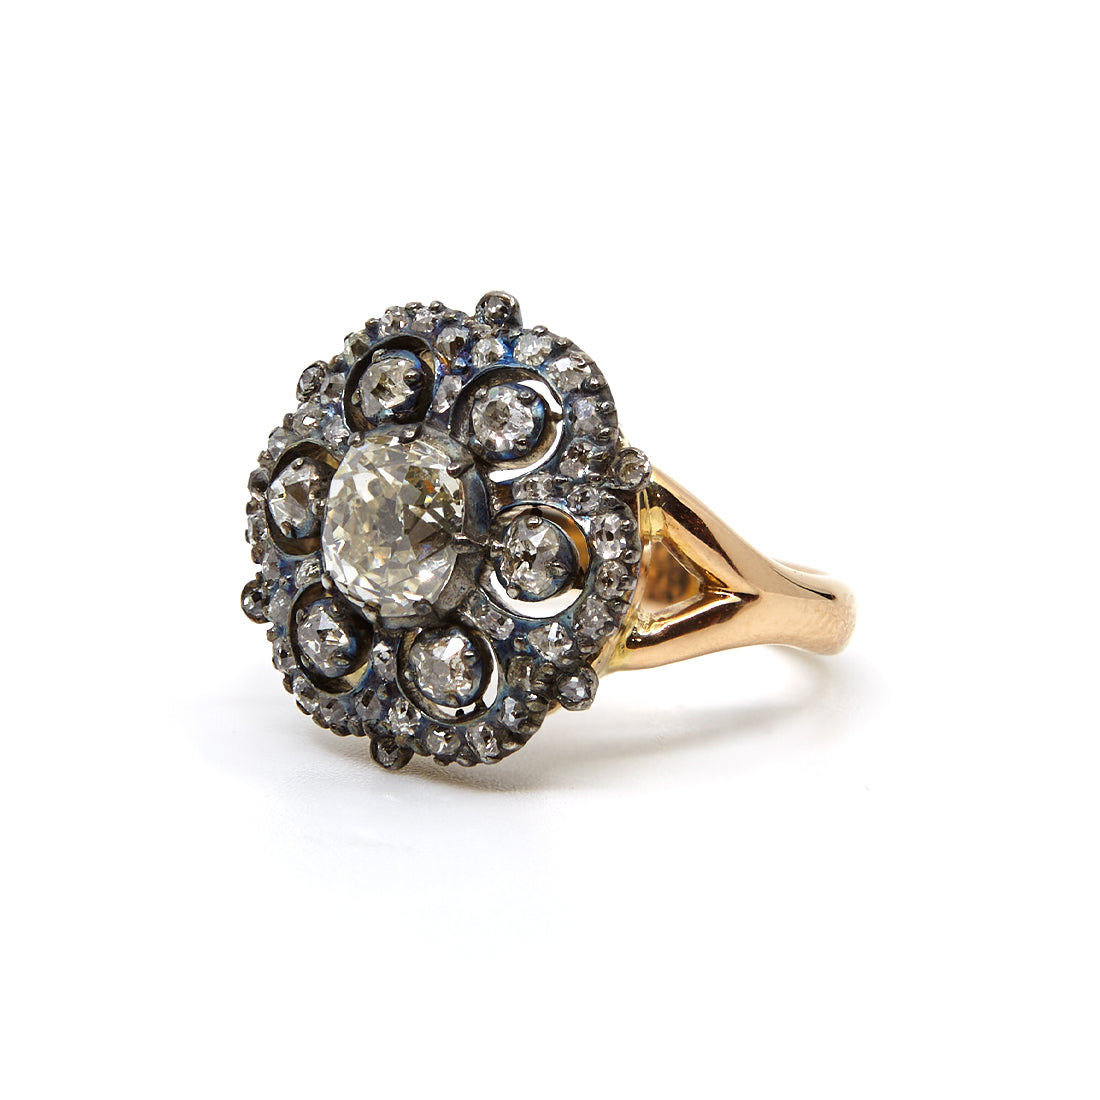 Antique yellow gold ring with rose cut diamond 